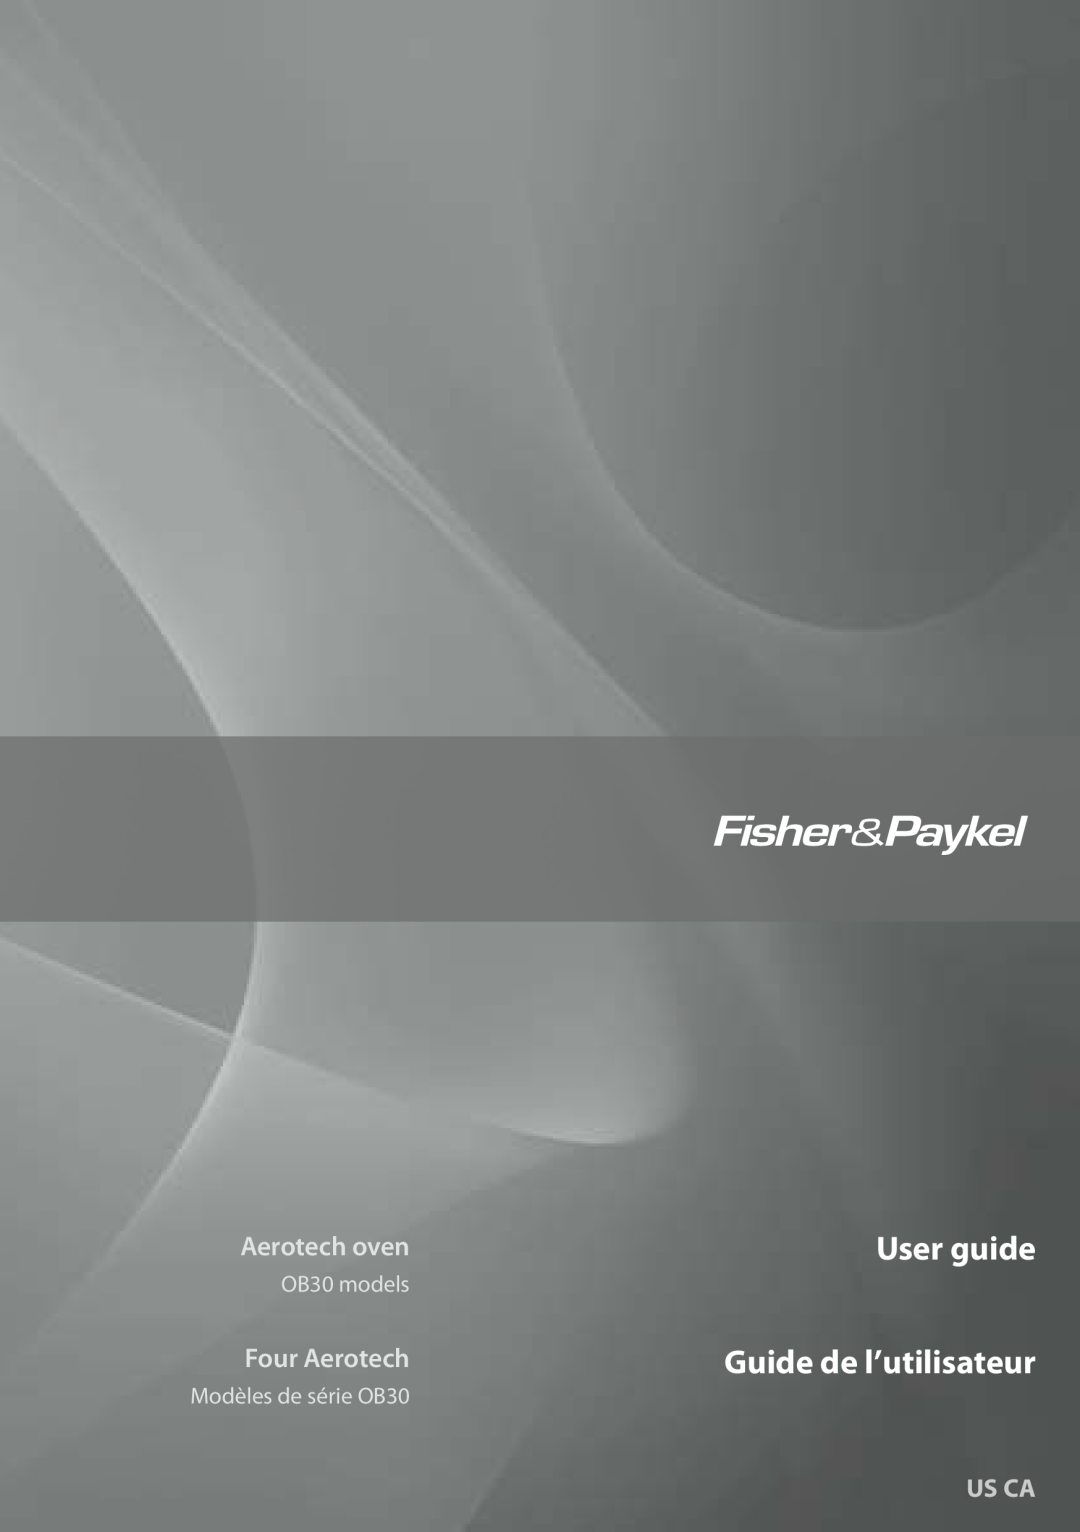 Fisher & Paykel manual User guide Guide de l’utilisateur, Aerotech oven, Four Aerotech, Us Ca, OB30 models 